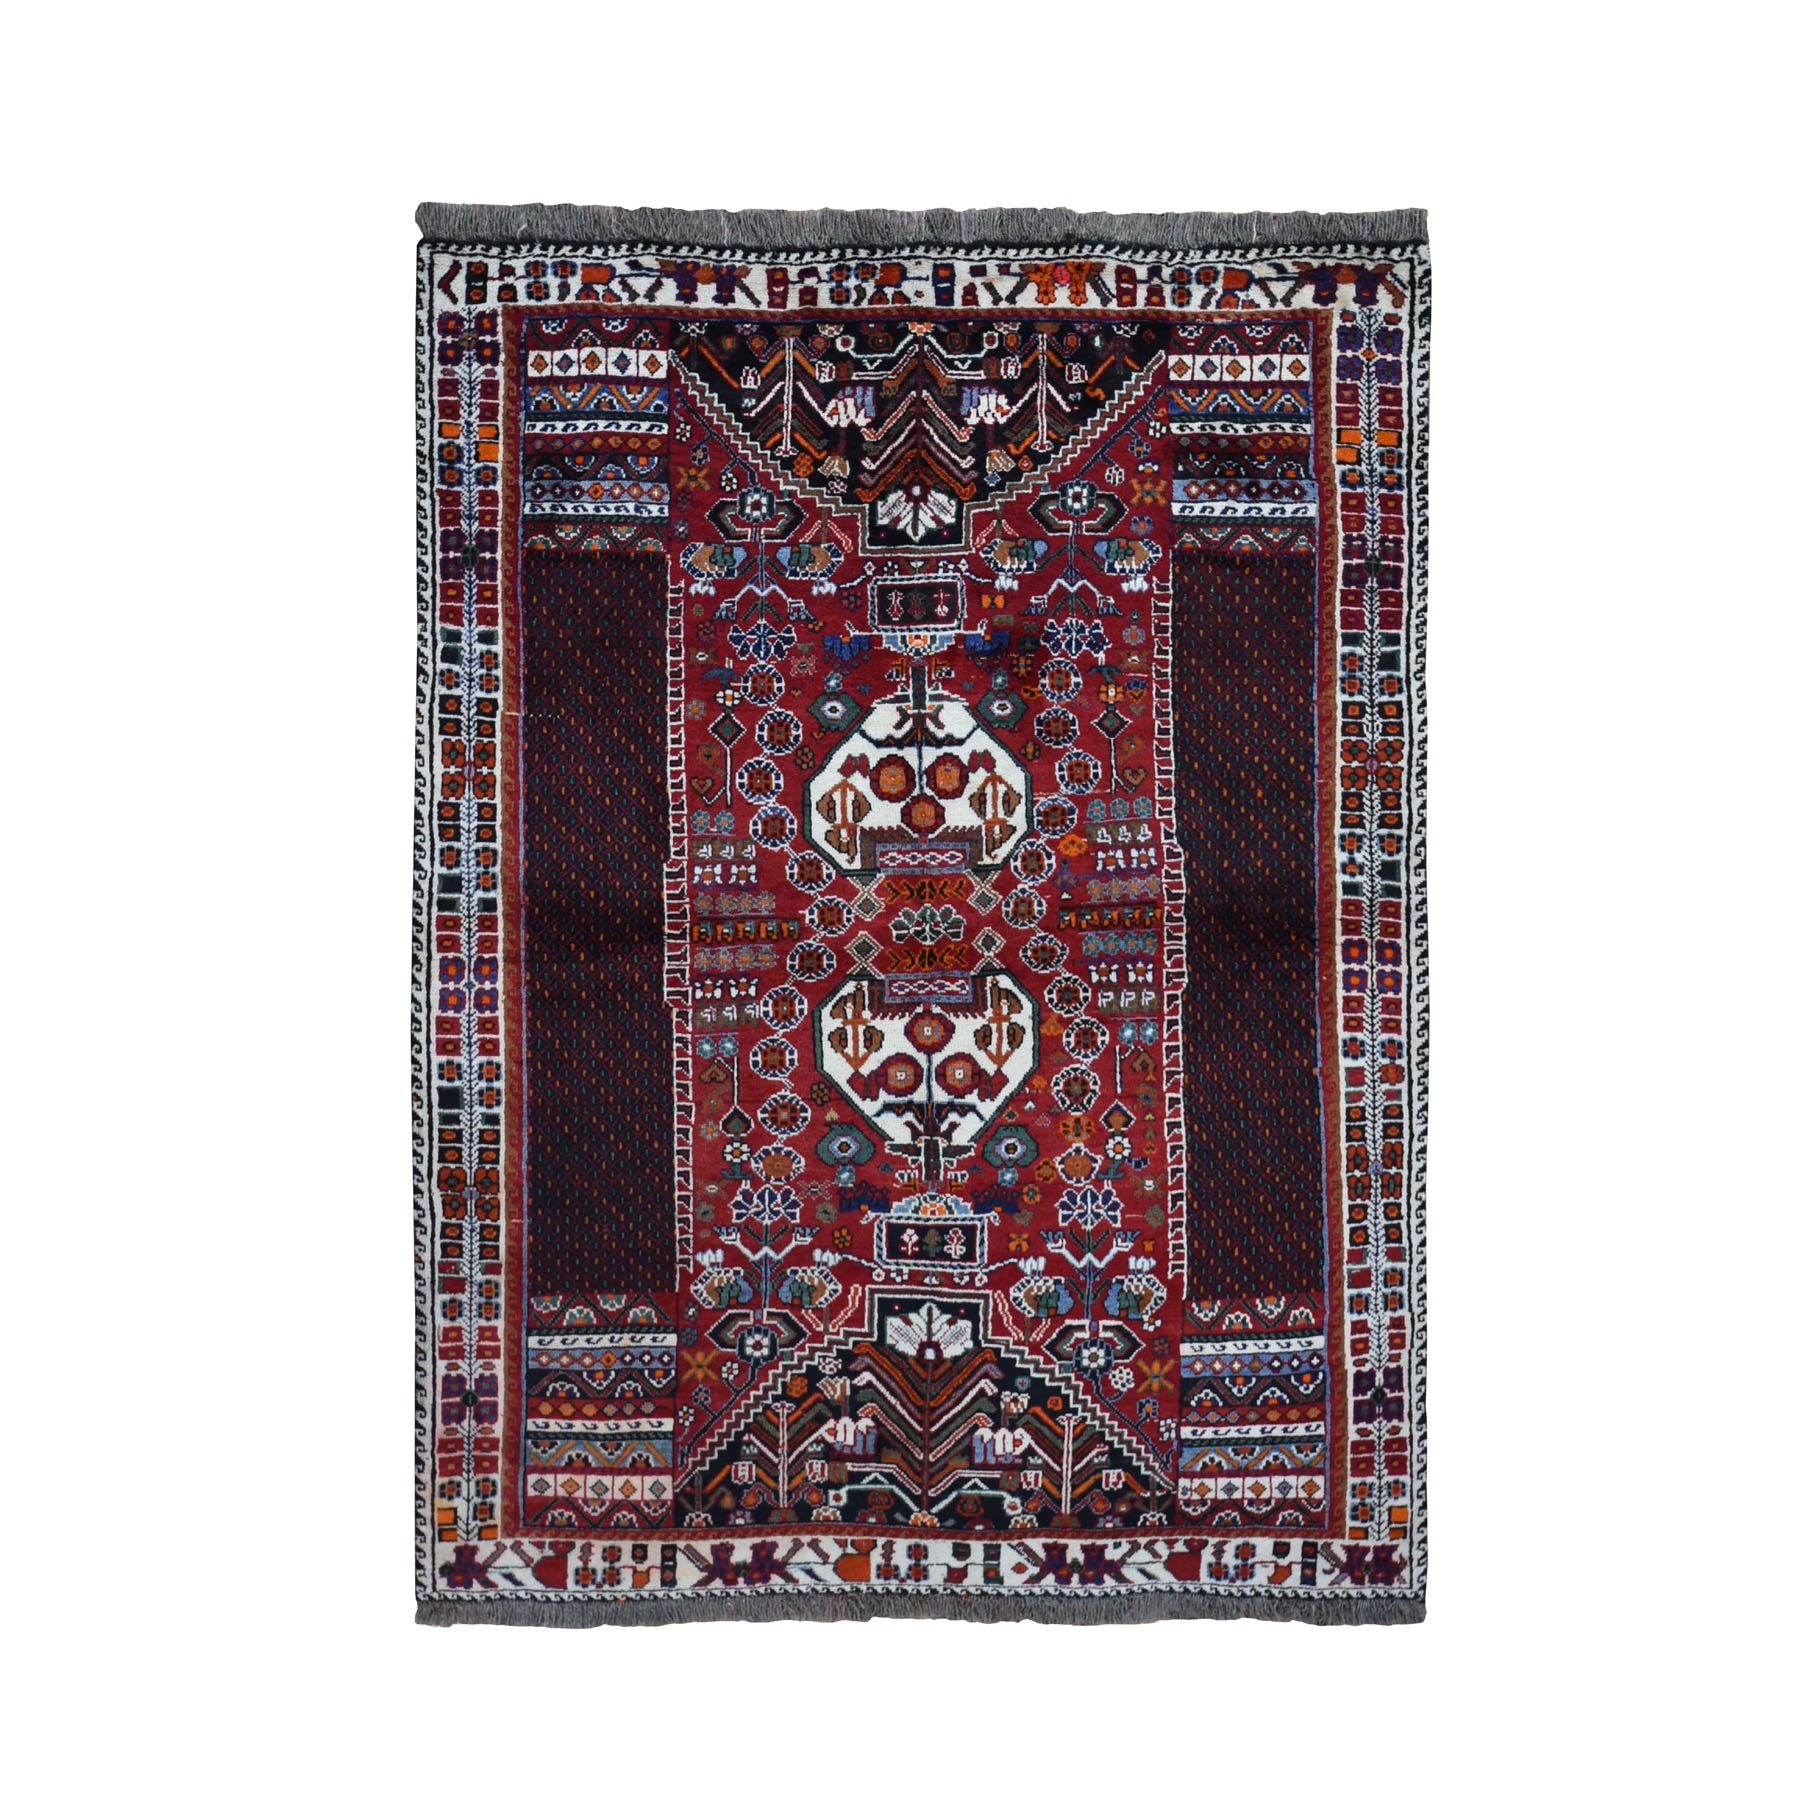 4'5"X6'5" Rust Red New Persian Shiraz Vase Design Full Pile Hand Knotted Oriental Rug moad9a0b